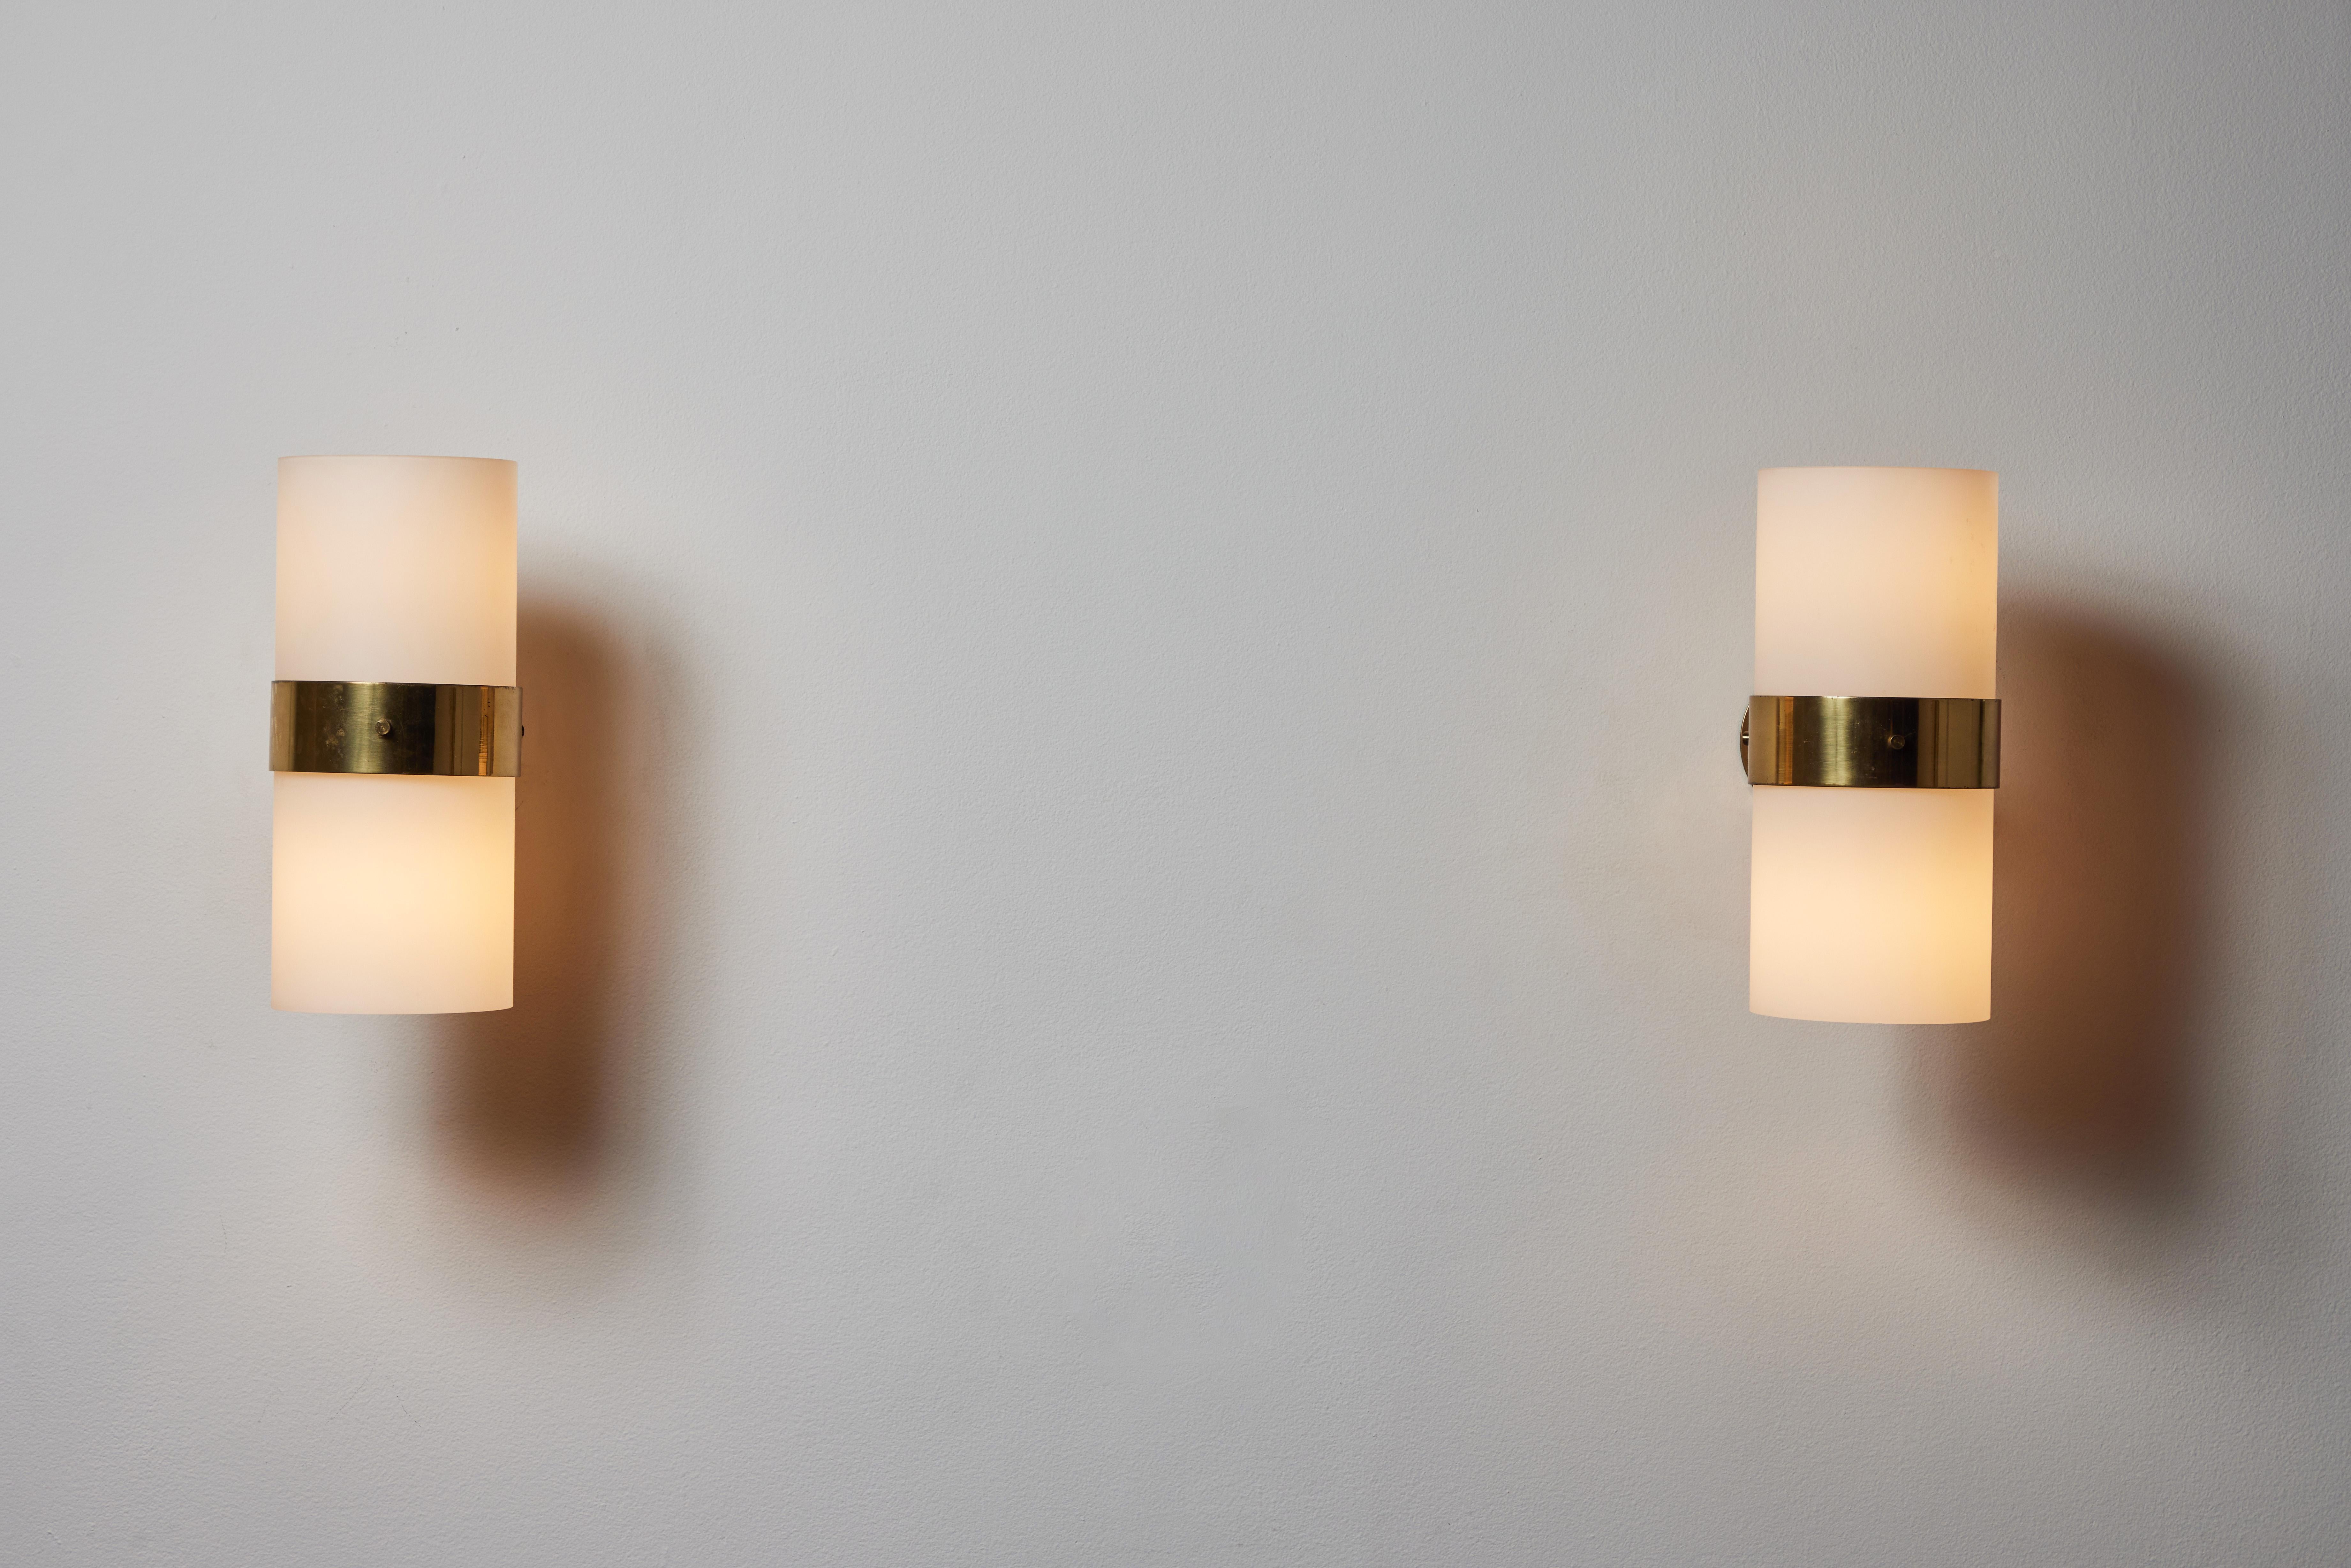 Pair of sconces by Candle. Manufactured in Italy, circa 1960s. Opaline glass diffuser, brass hardware. Custom brass backplates. Rewired for U.S. standards. We recommend two E26 bulbs per sconce Bulbs provided as a one time courtesy.